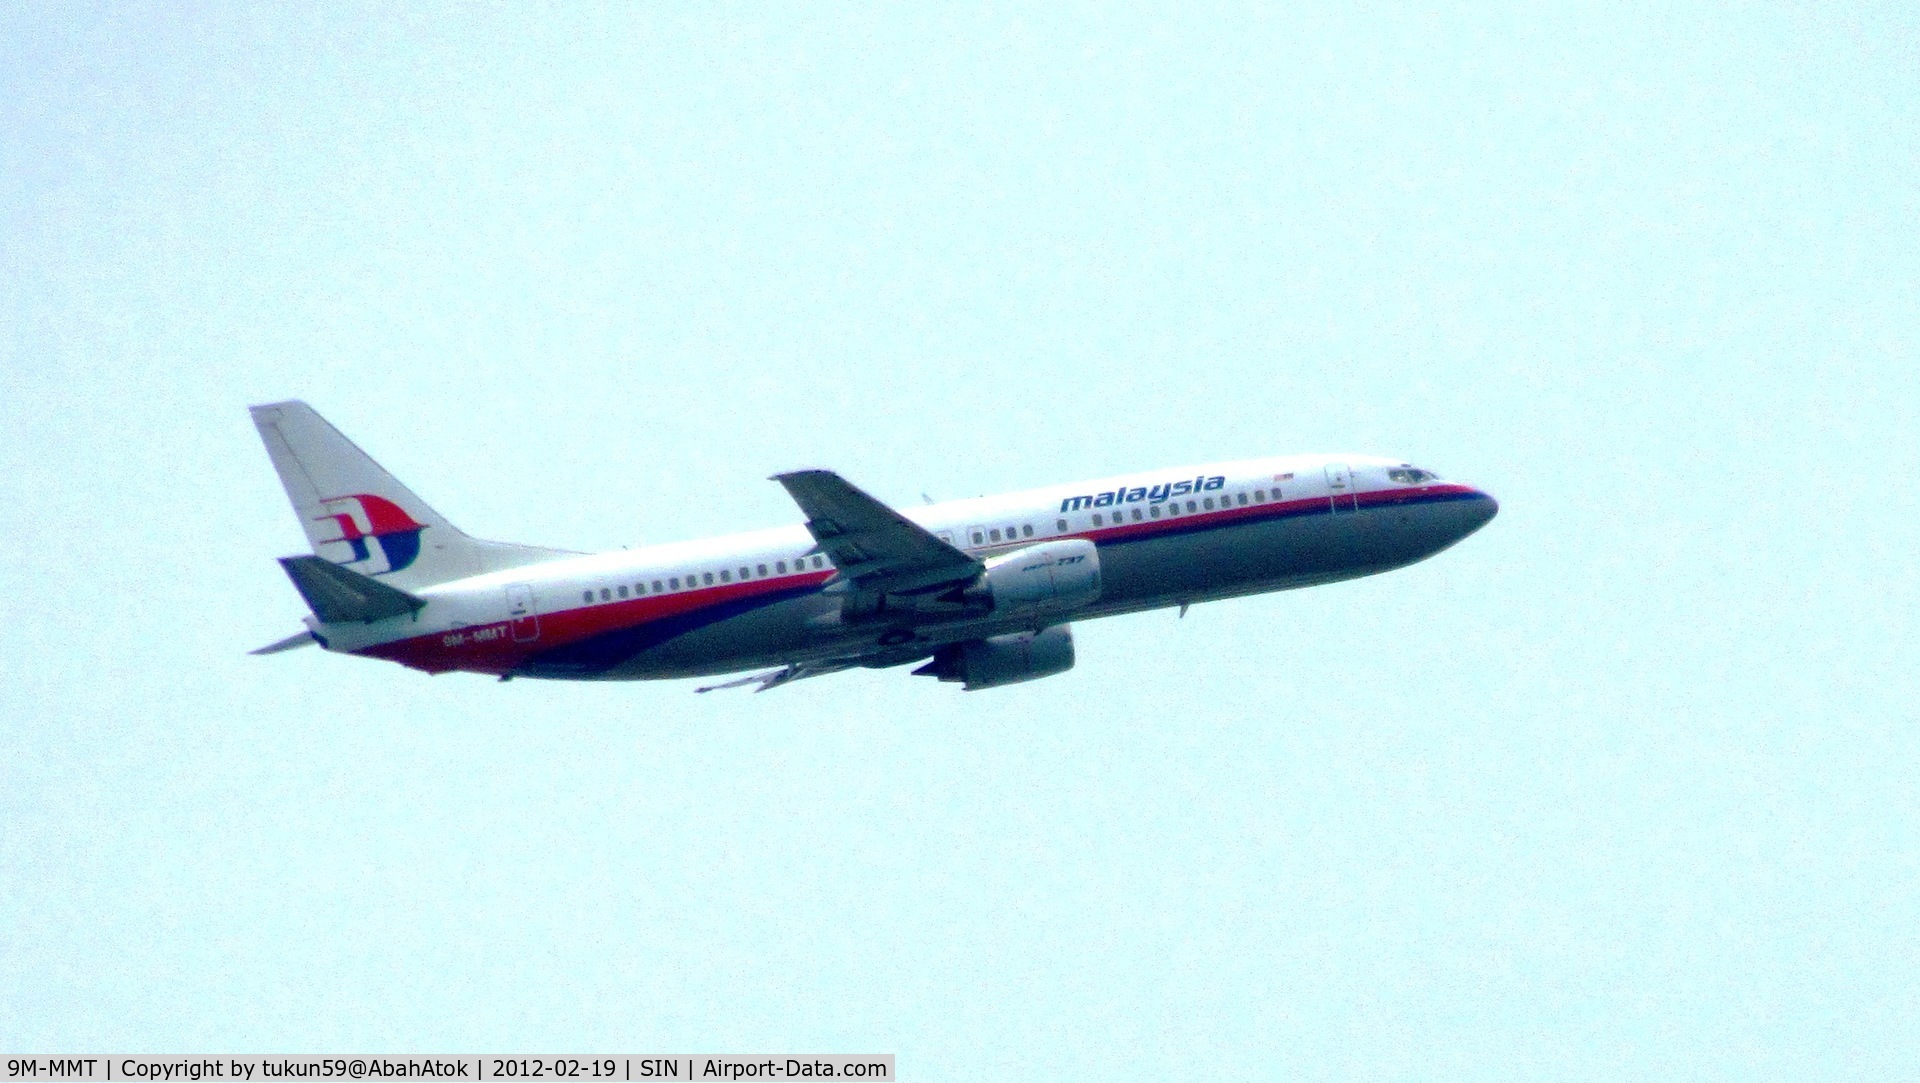 9M-MMT, Boeing 737-4H6 C/N 27170, Malaysia Airlines